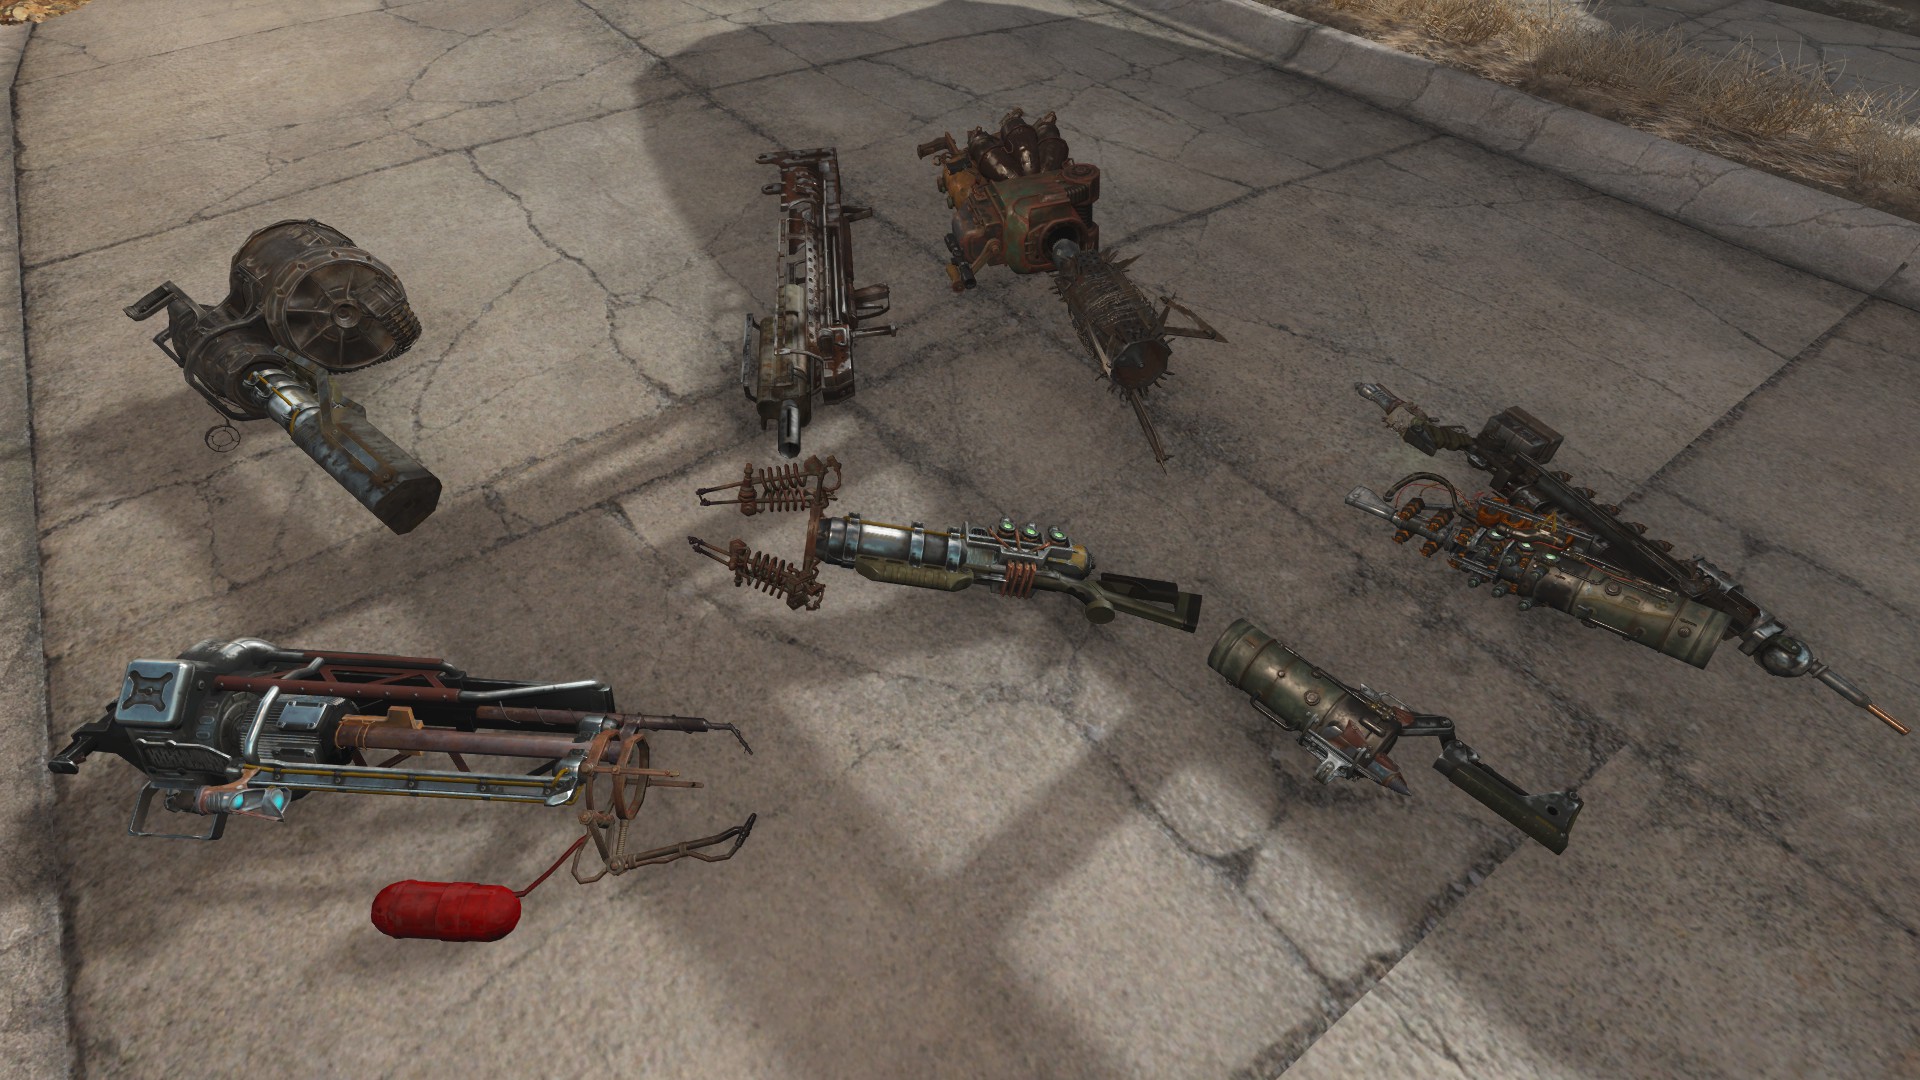 Lowered weapons для fallout 4 фото 47